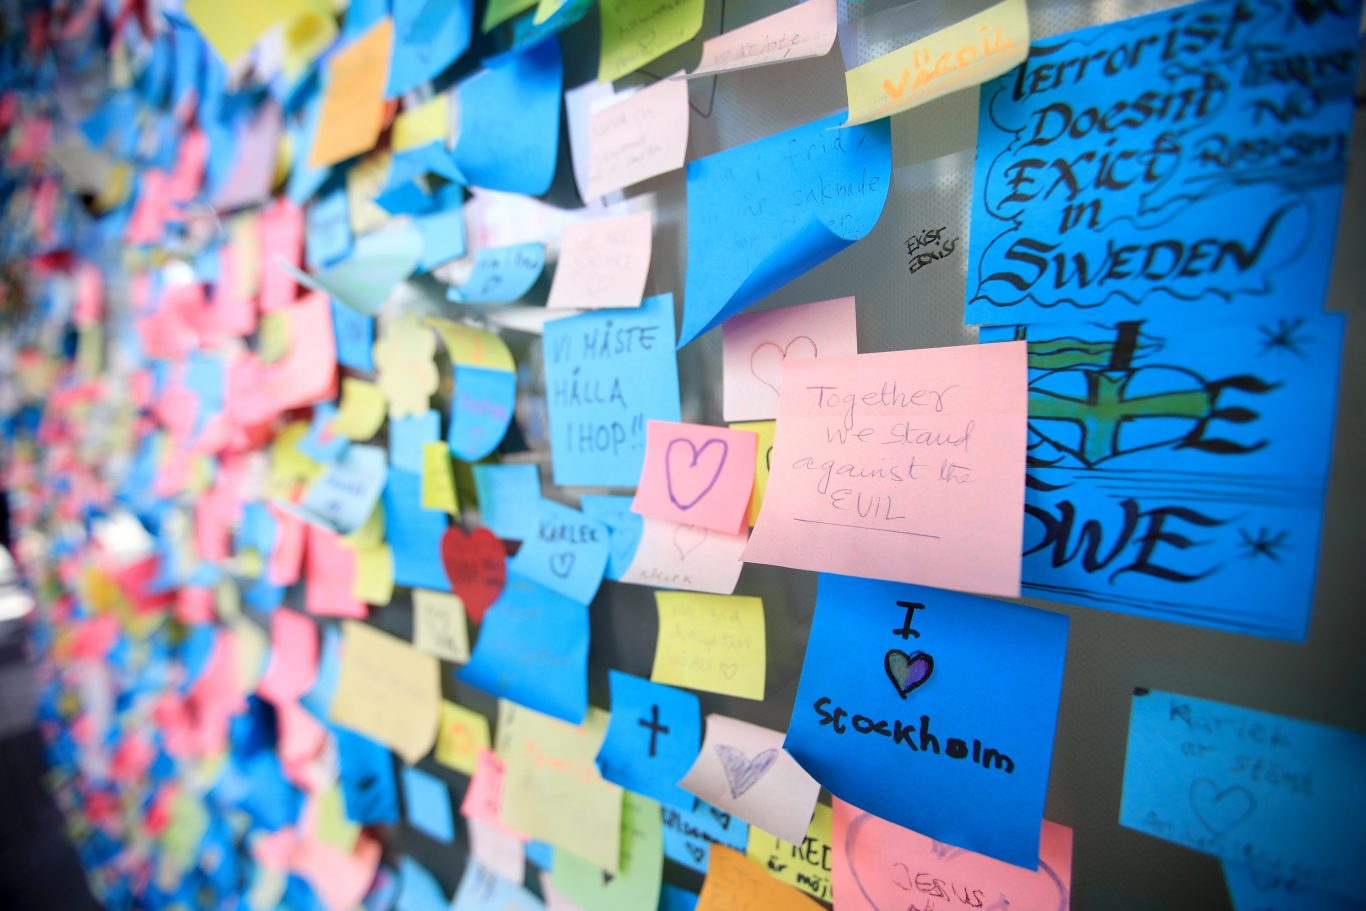 Messages of condolence at the scene of the April terror attack ahead of the Europa League final (Mike Egerton/EMPICS)